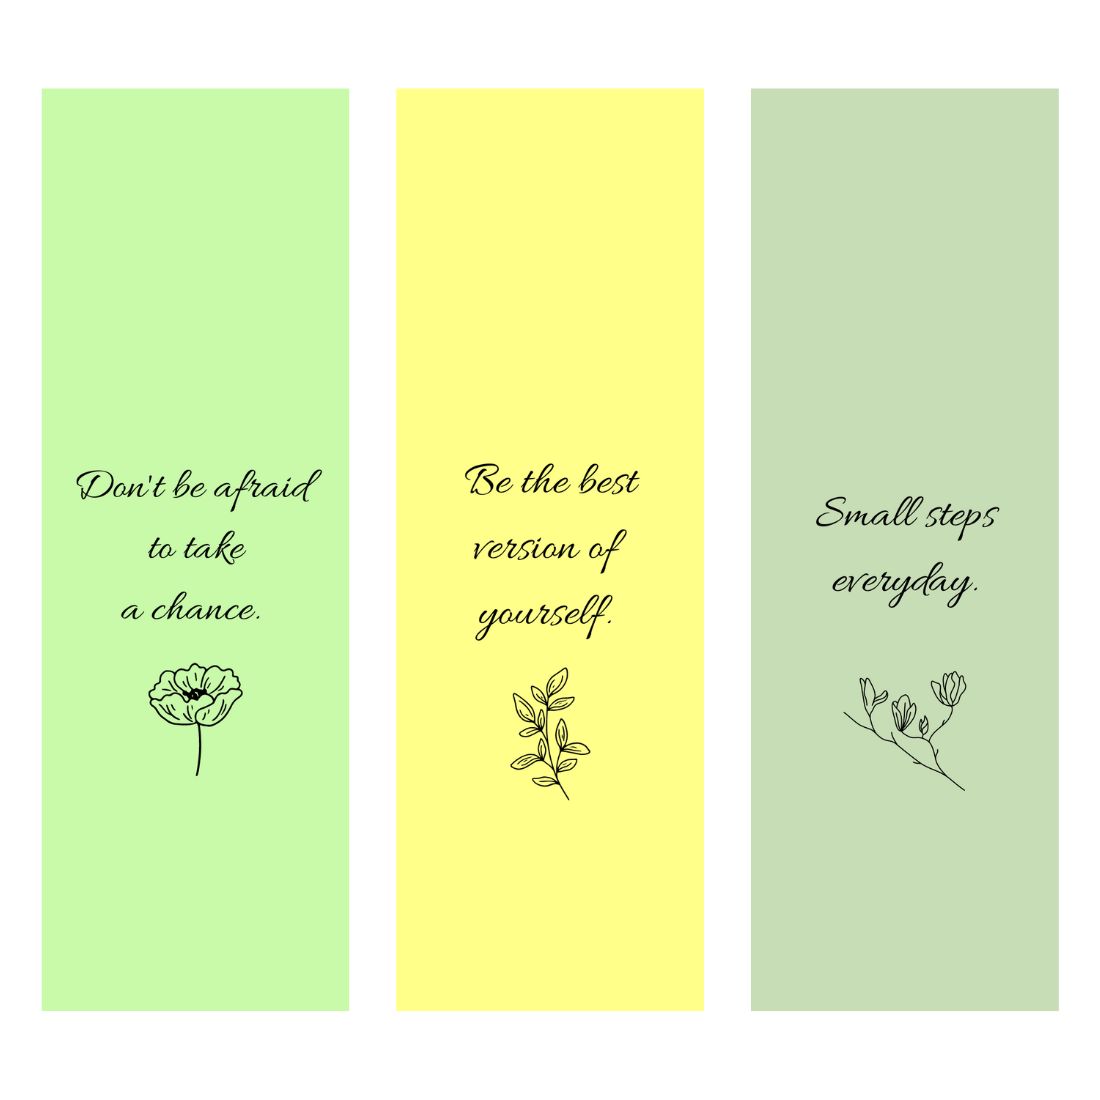 Colourful Digital Bookmarks in green and yellow colors.